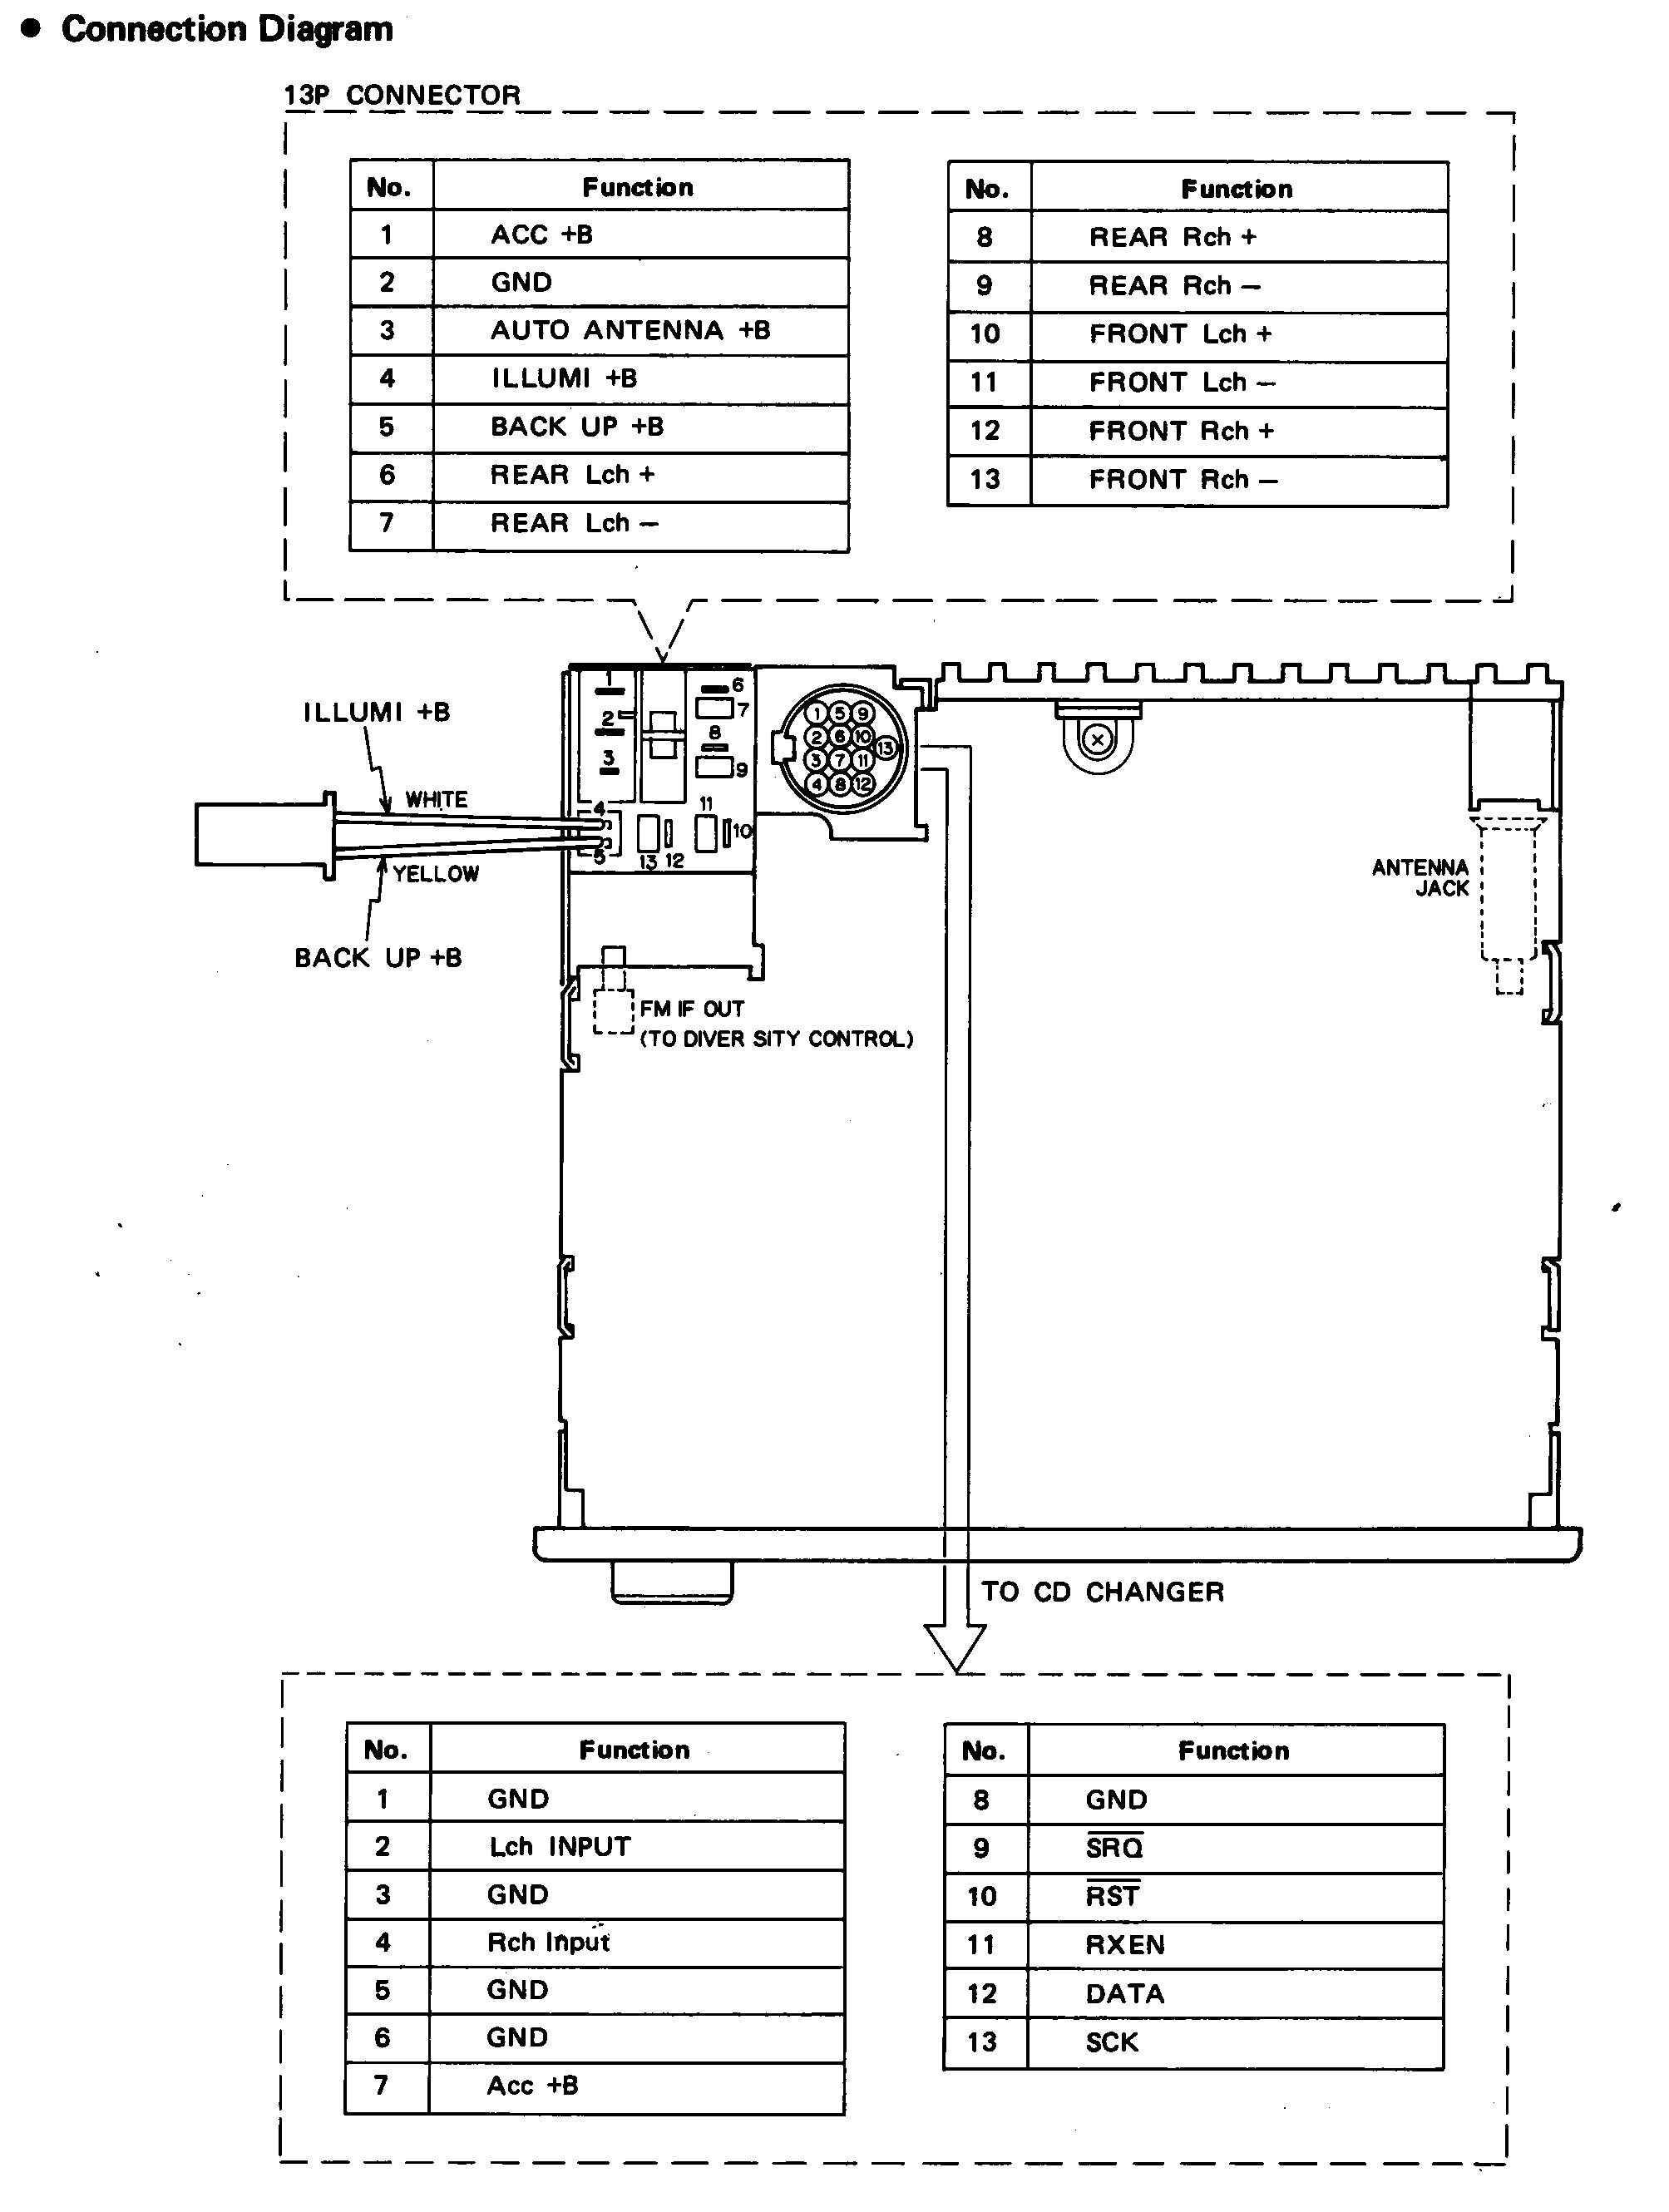 Wiring Diagram for Code Alarm Refrence Bmw Alarm Wiring Diagram Save Car Stereo Wiring Harness Color